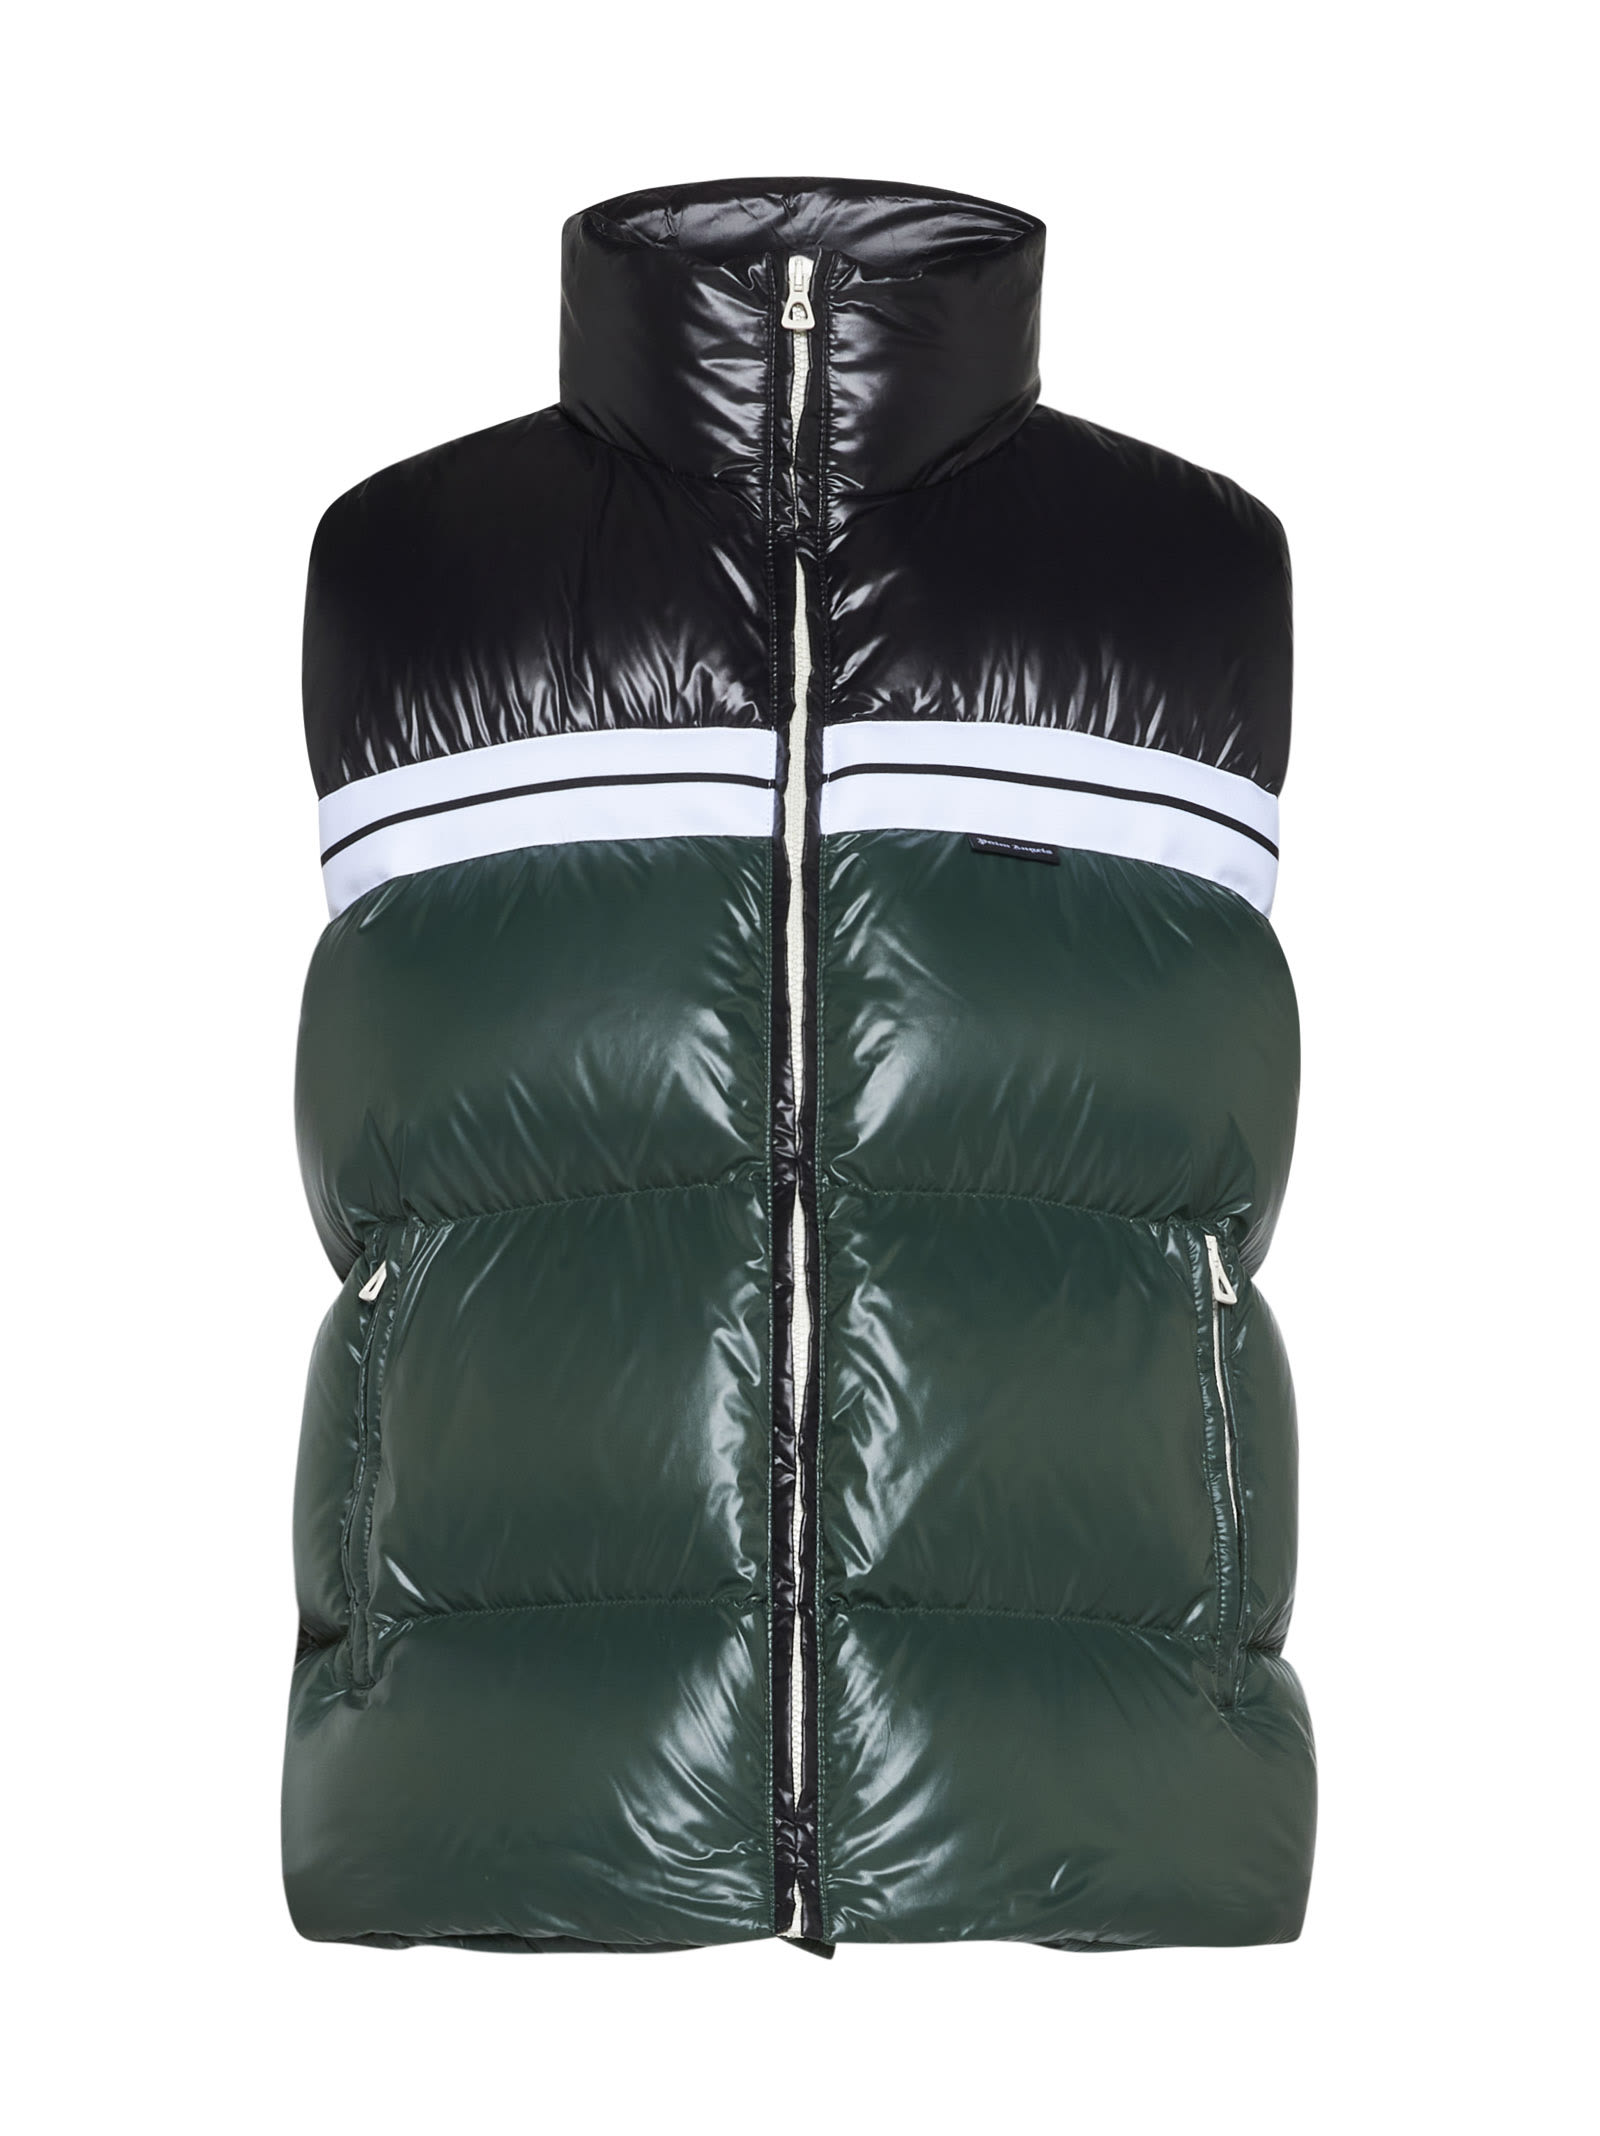 Palm Angels Down Jacket